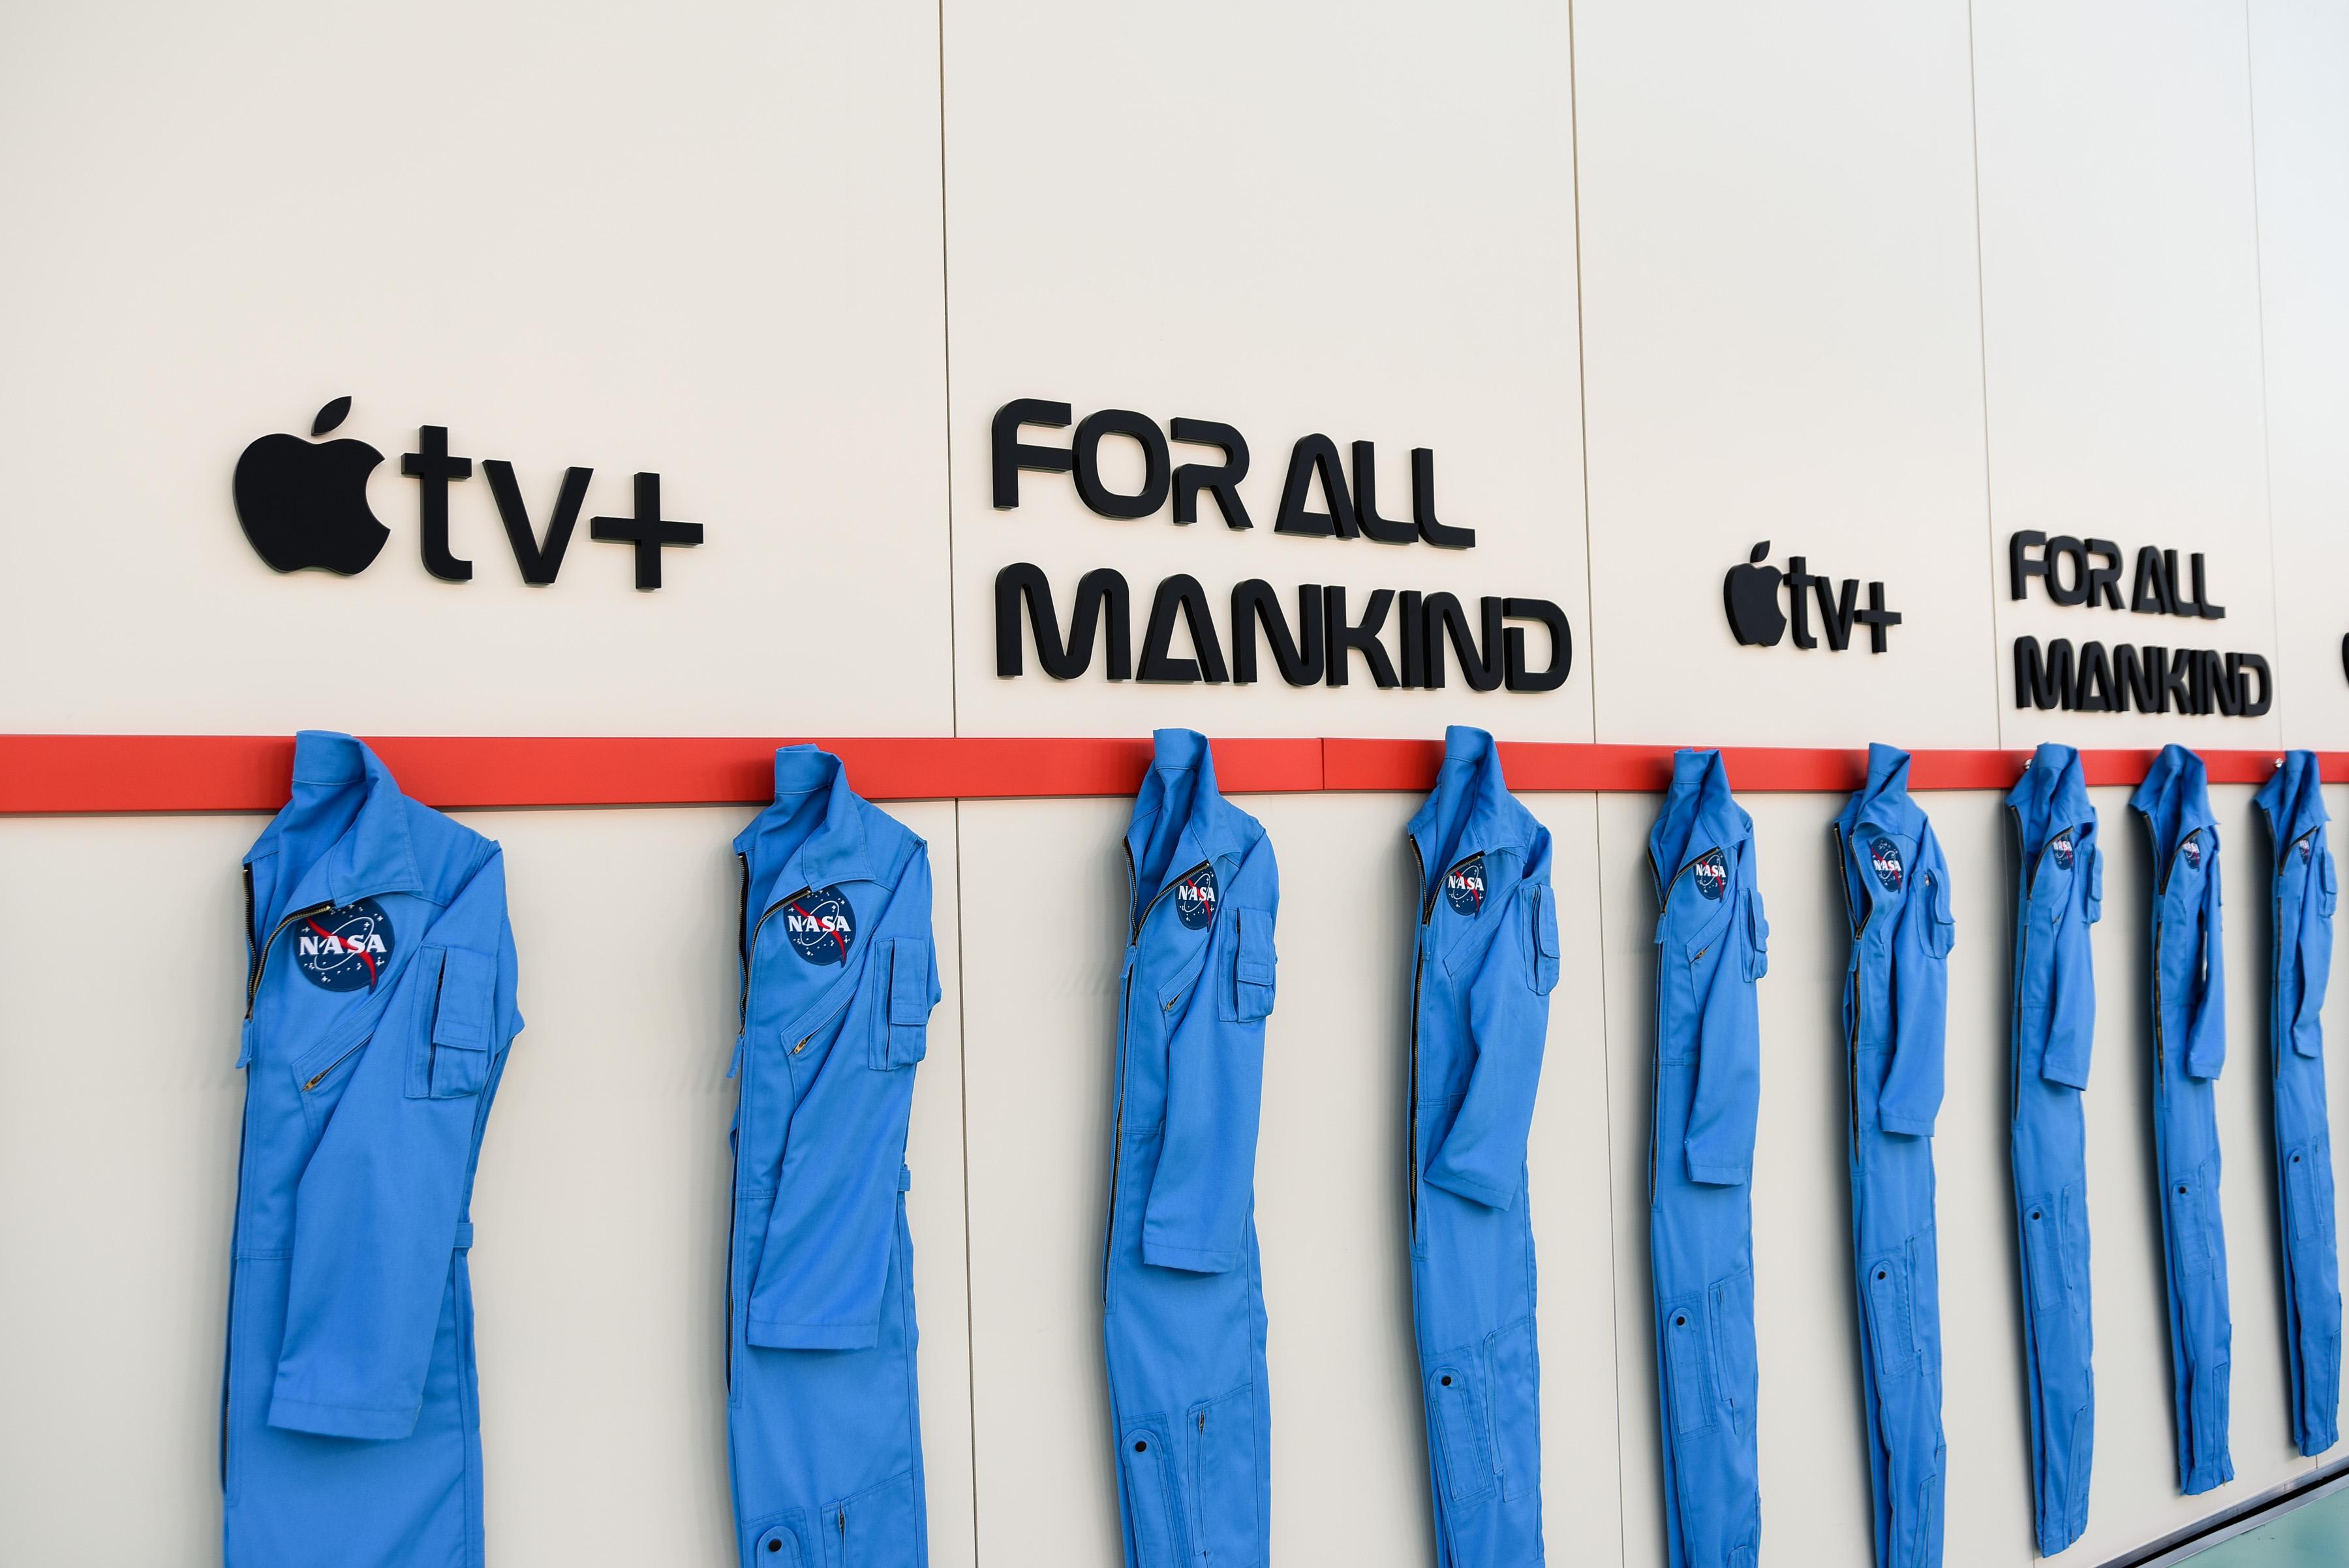 Blue NASA uniforms hung in a line on the wall, under branding for Apple TV+ and For All Mankind. 